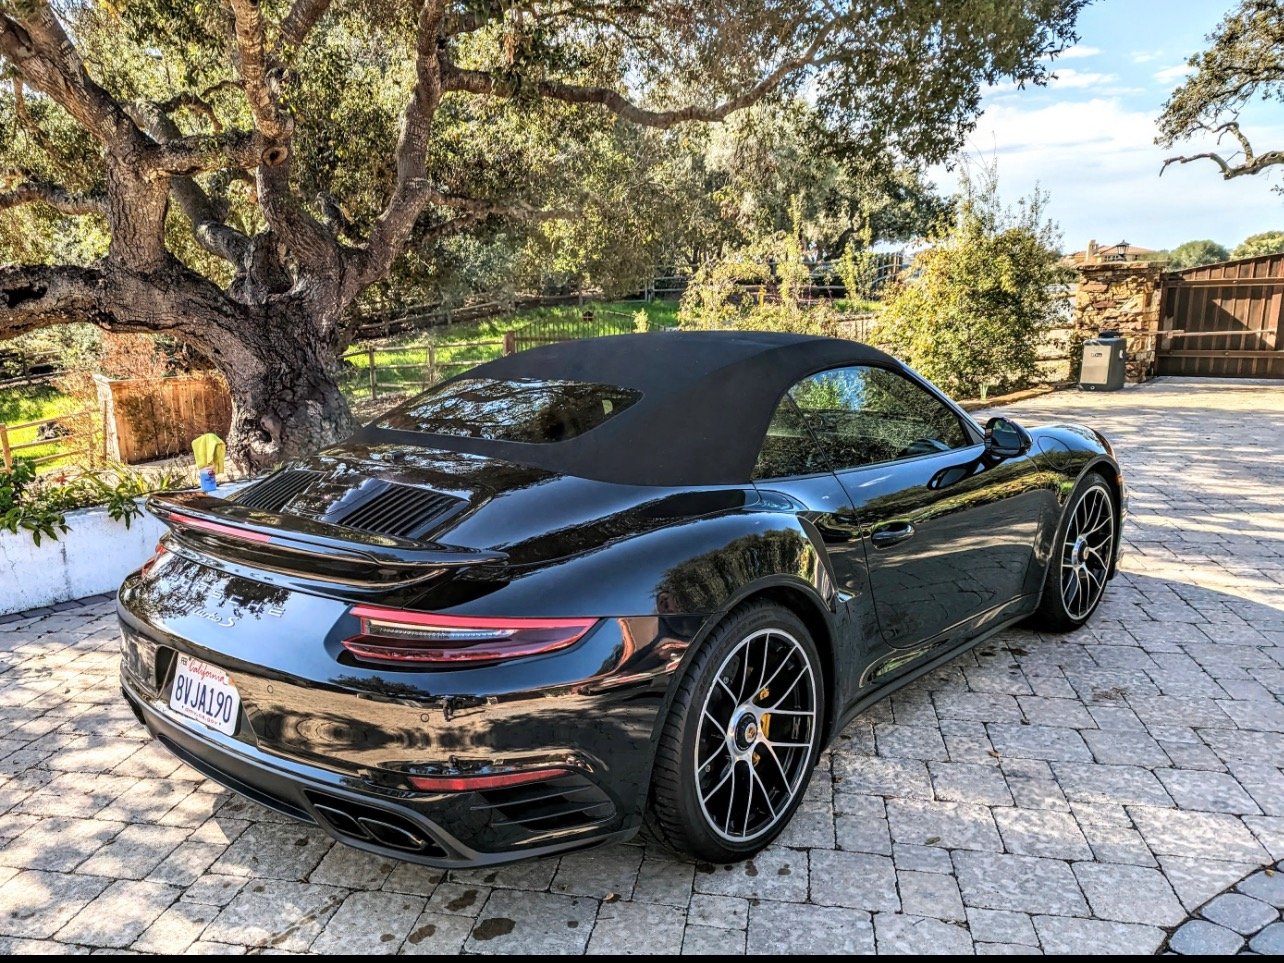 Used 2019 Porsche 911 Turbo S Cabriolet For Sale (3)